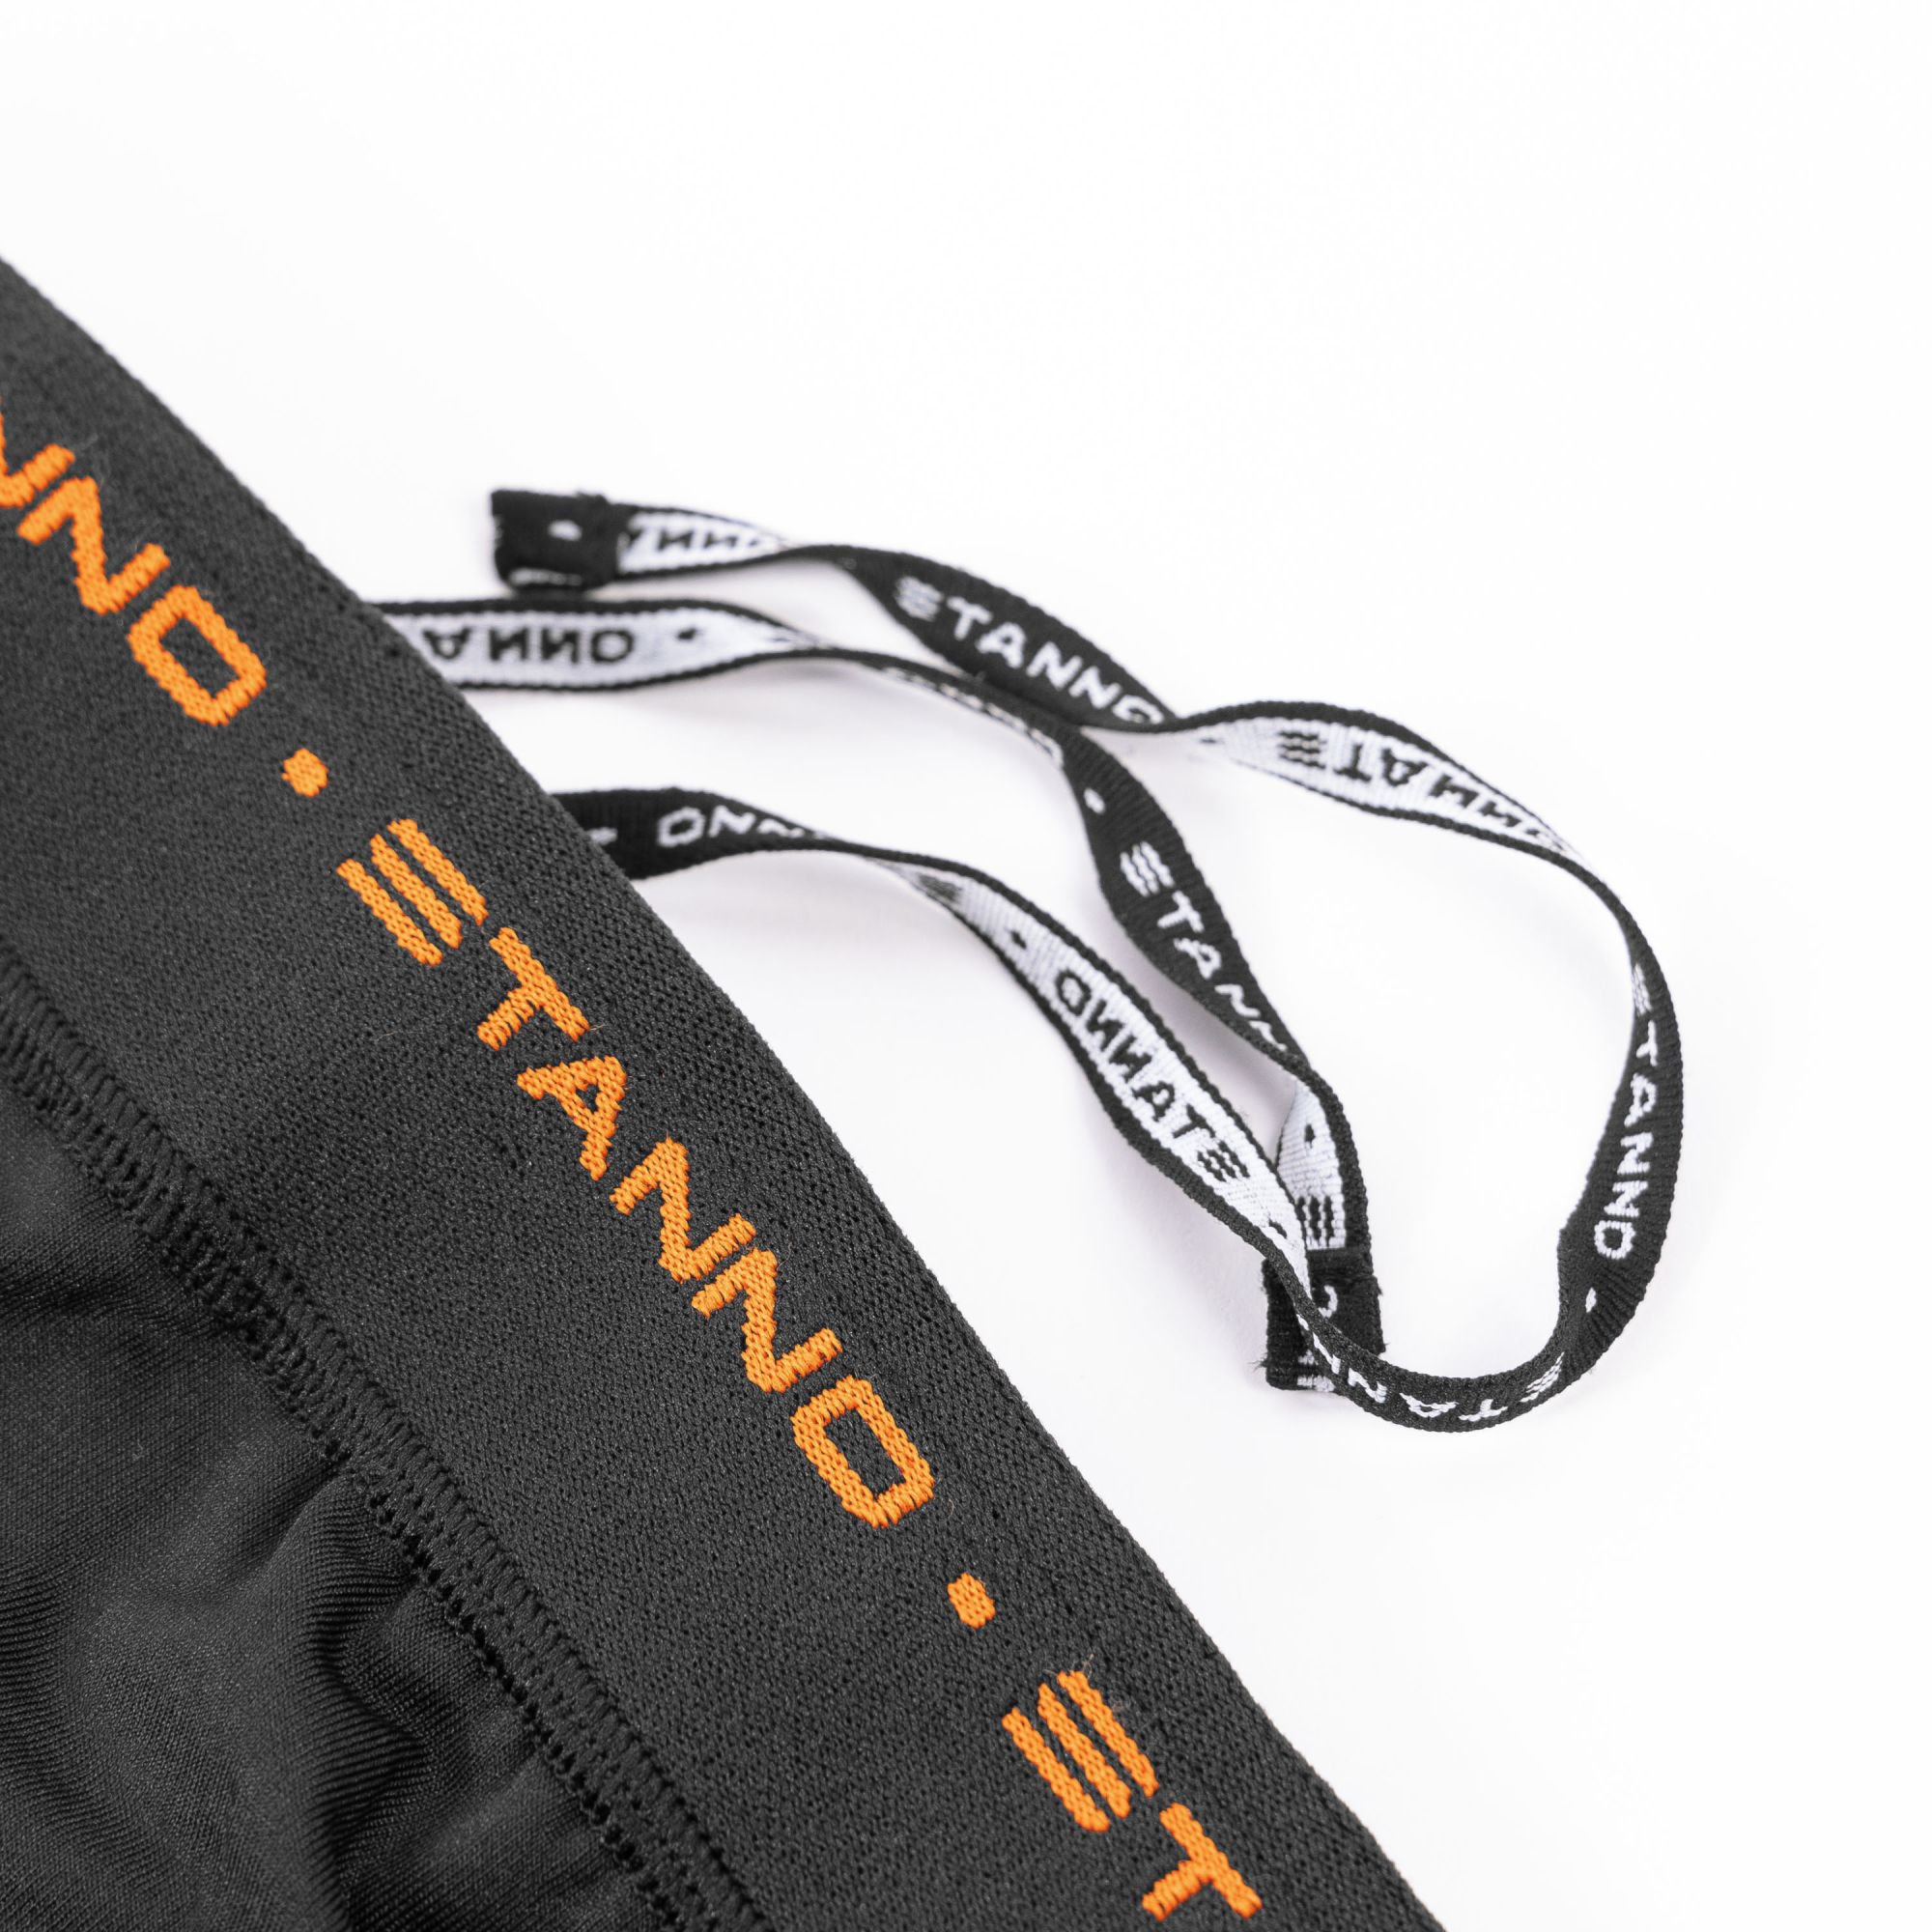 Stanno Equip Protection Shorts